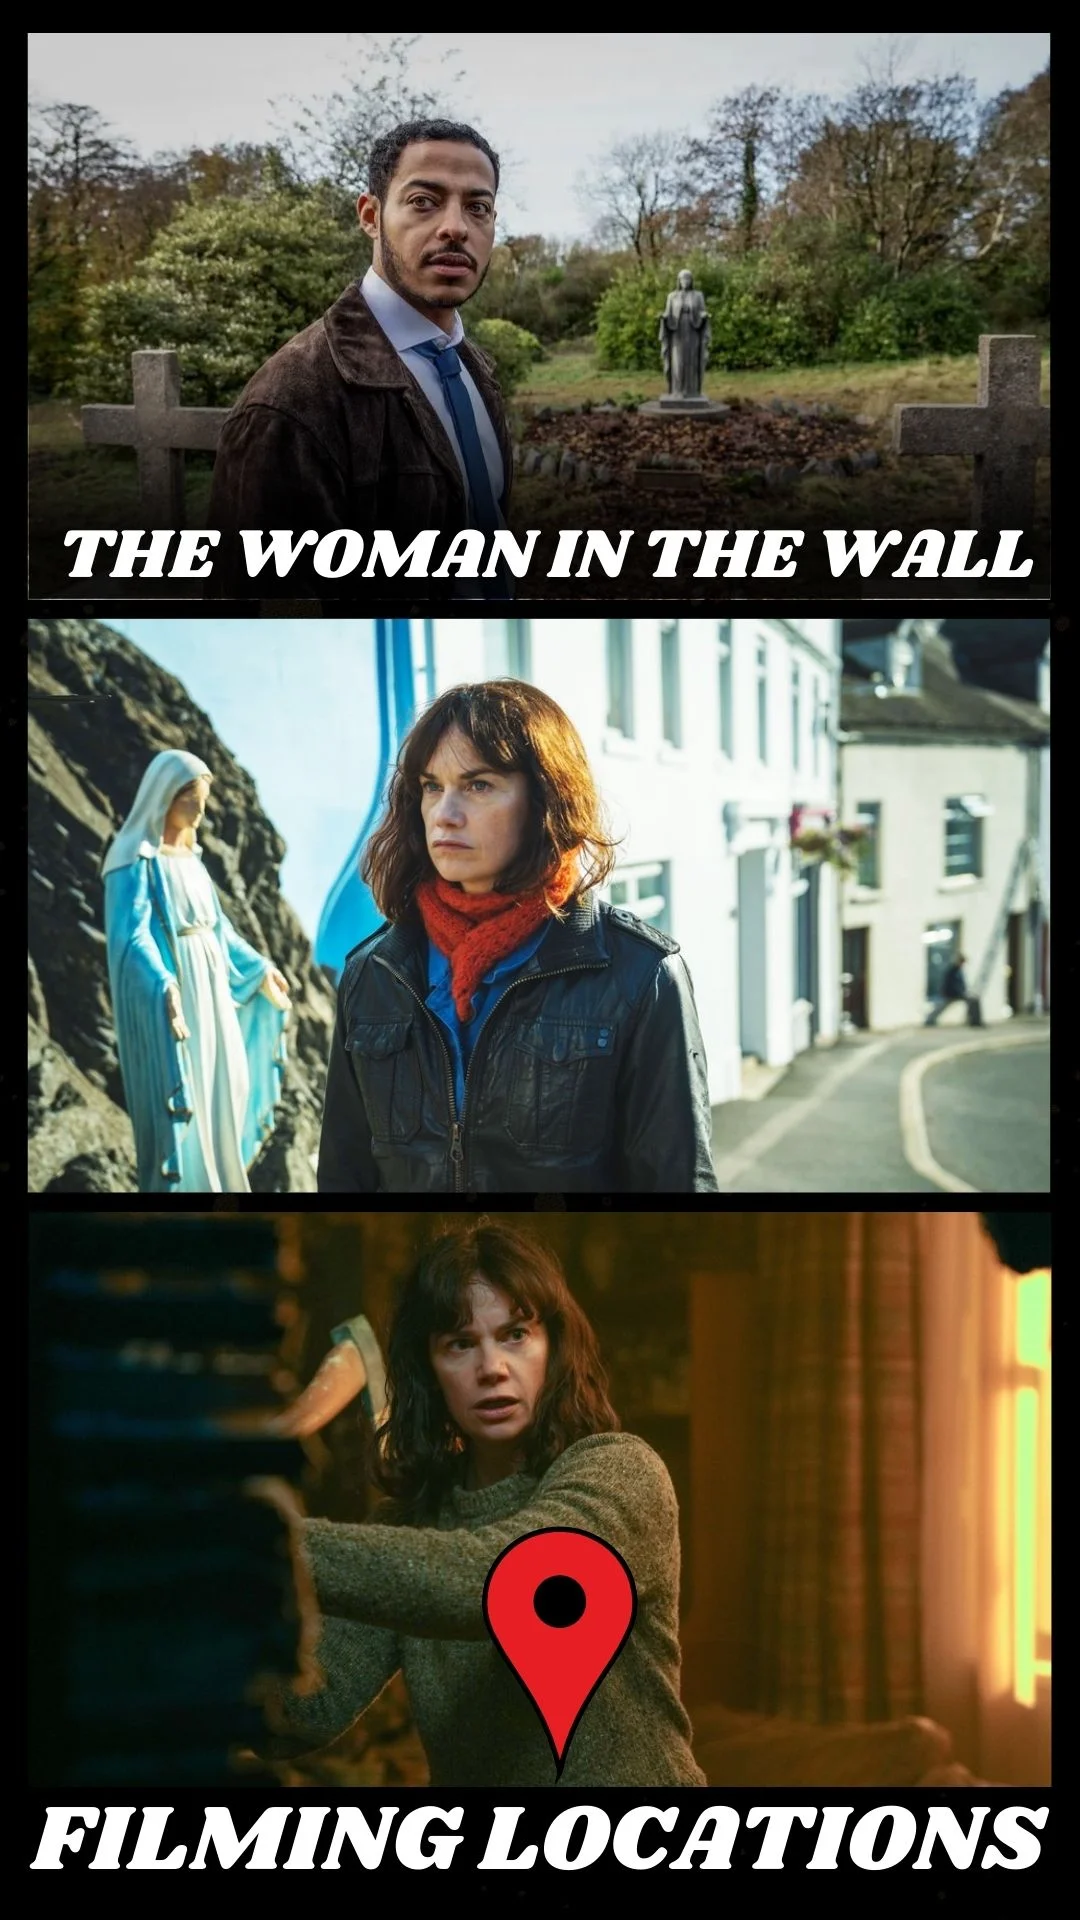 The Woman in the Wall Filming Locations